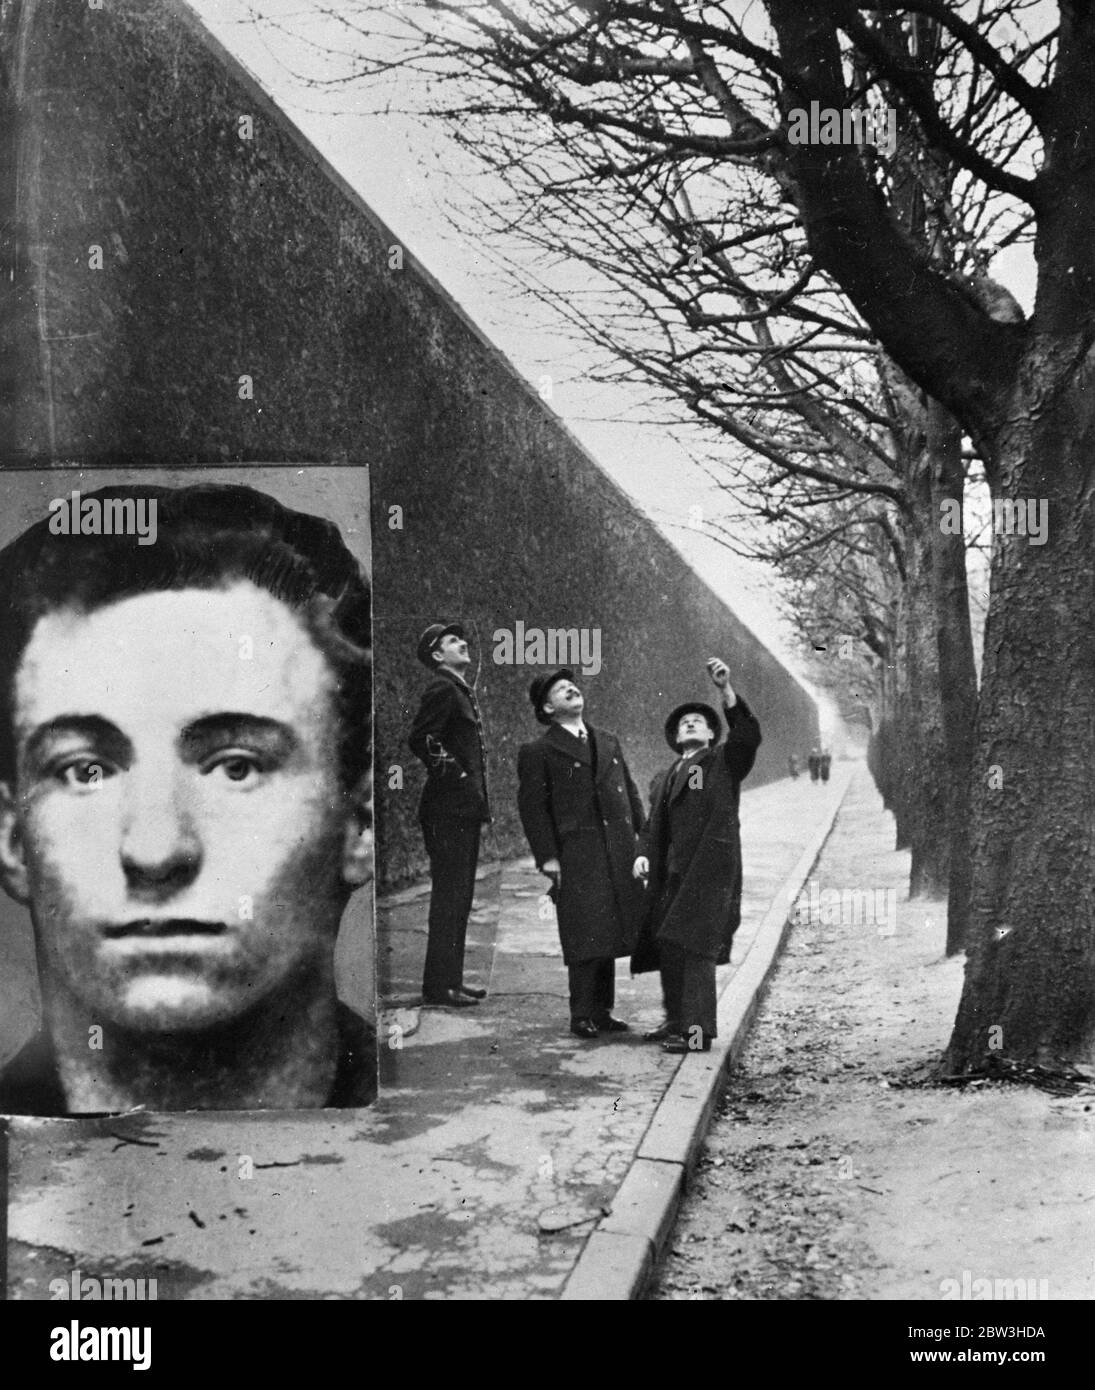 Second man in history to escape from Sante prison . Police officers pointing to the tree from which a rope was thrown to Armand Spilers so that he could scale the prison wall ( on left ) . Inset is the escaped convict . 21 March 1935 Stock Photo